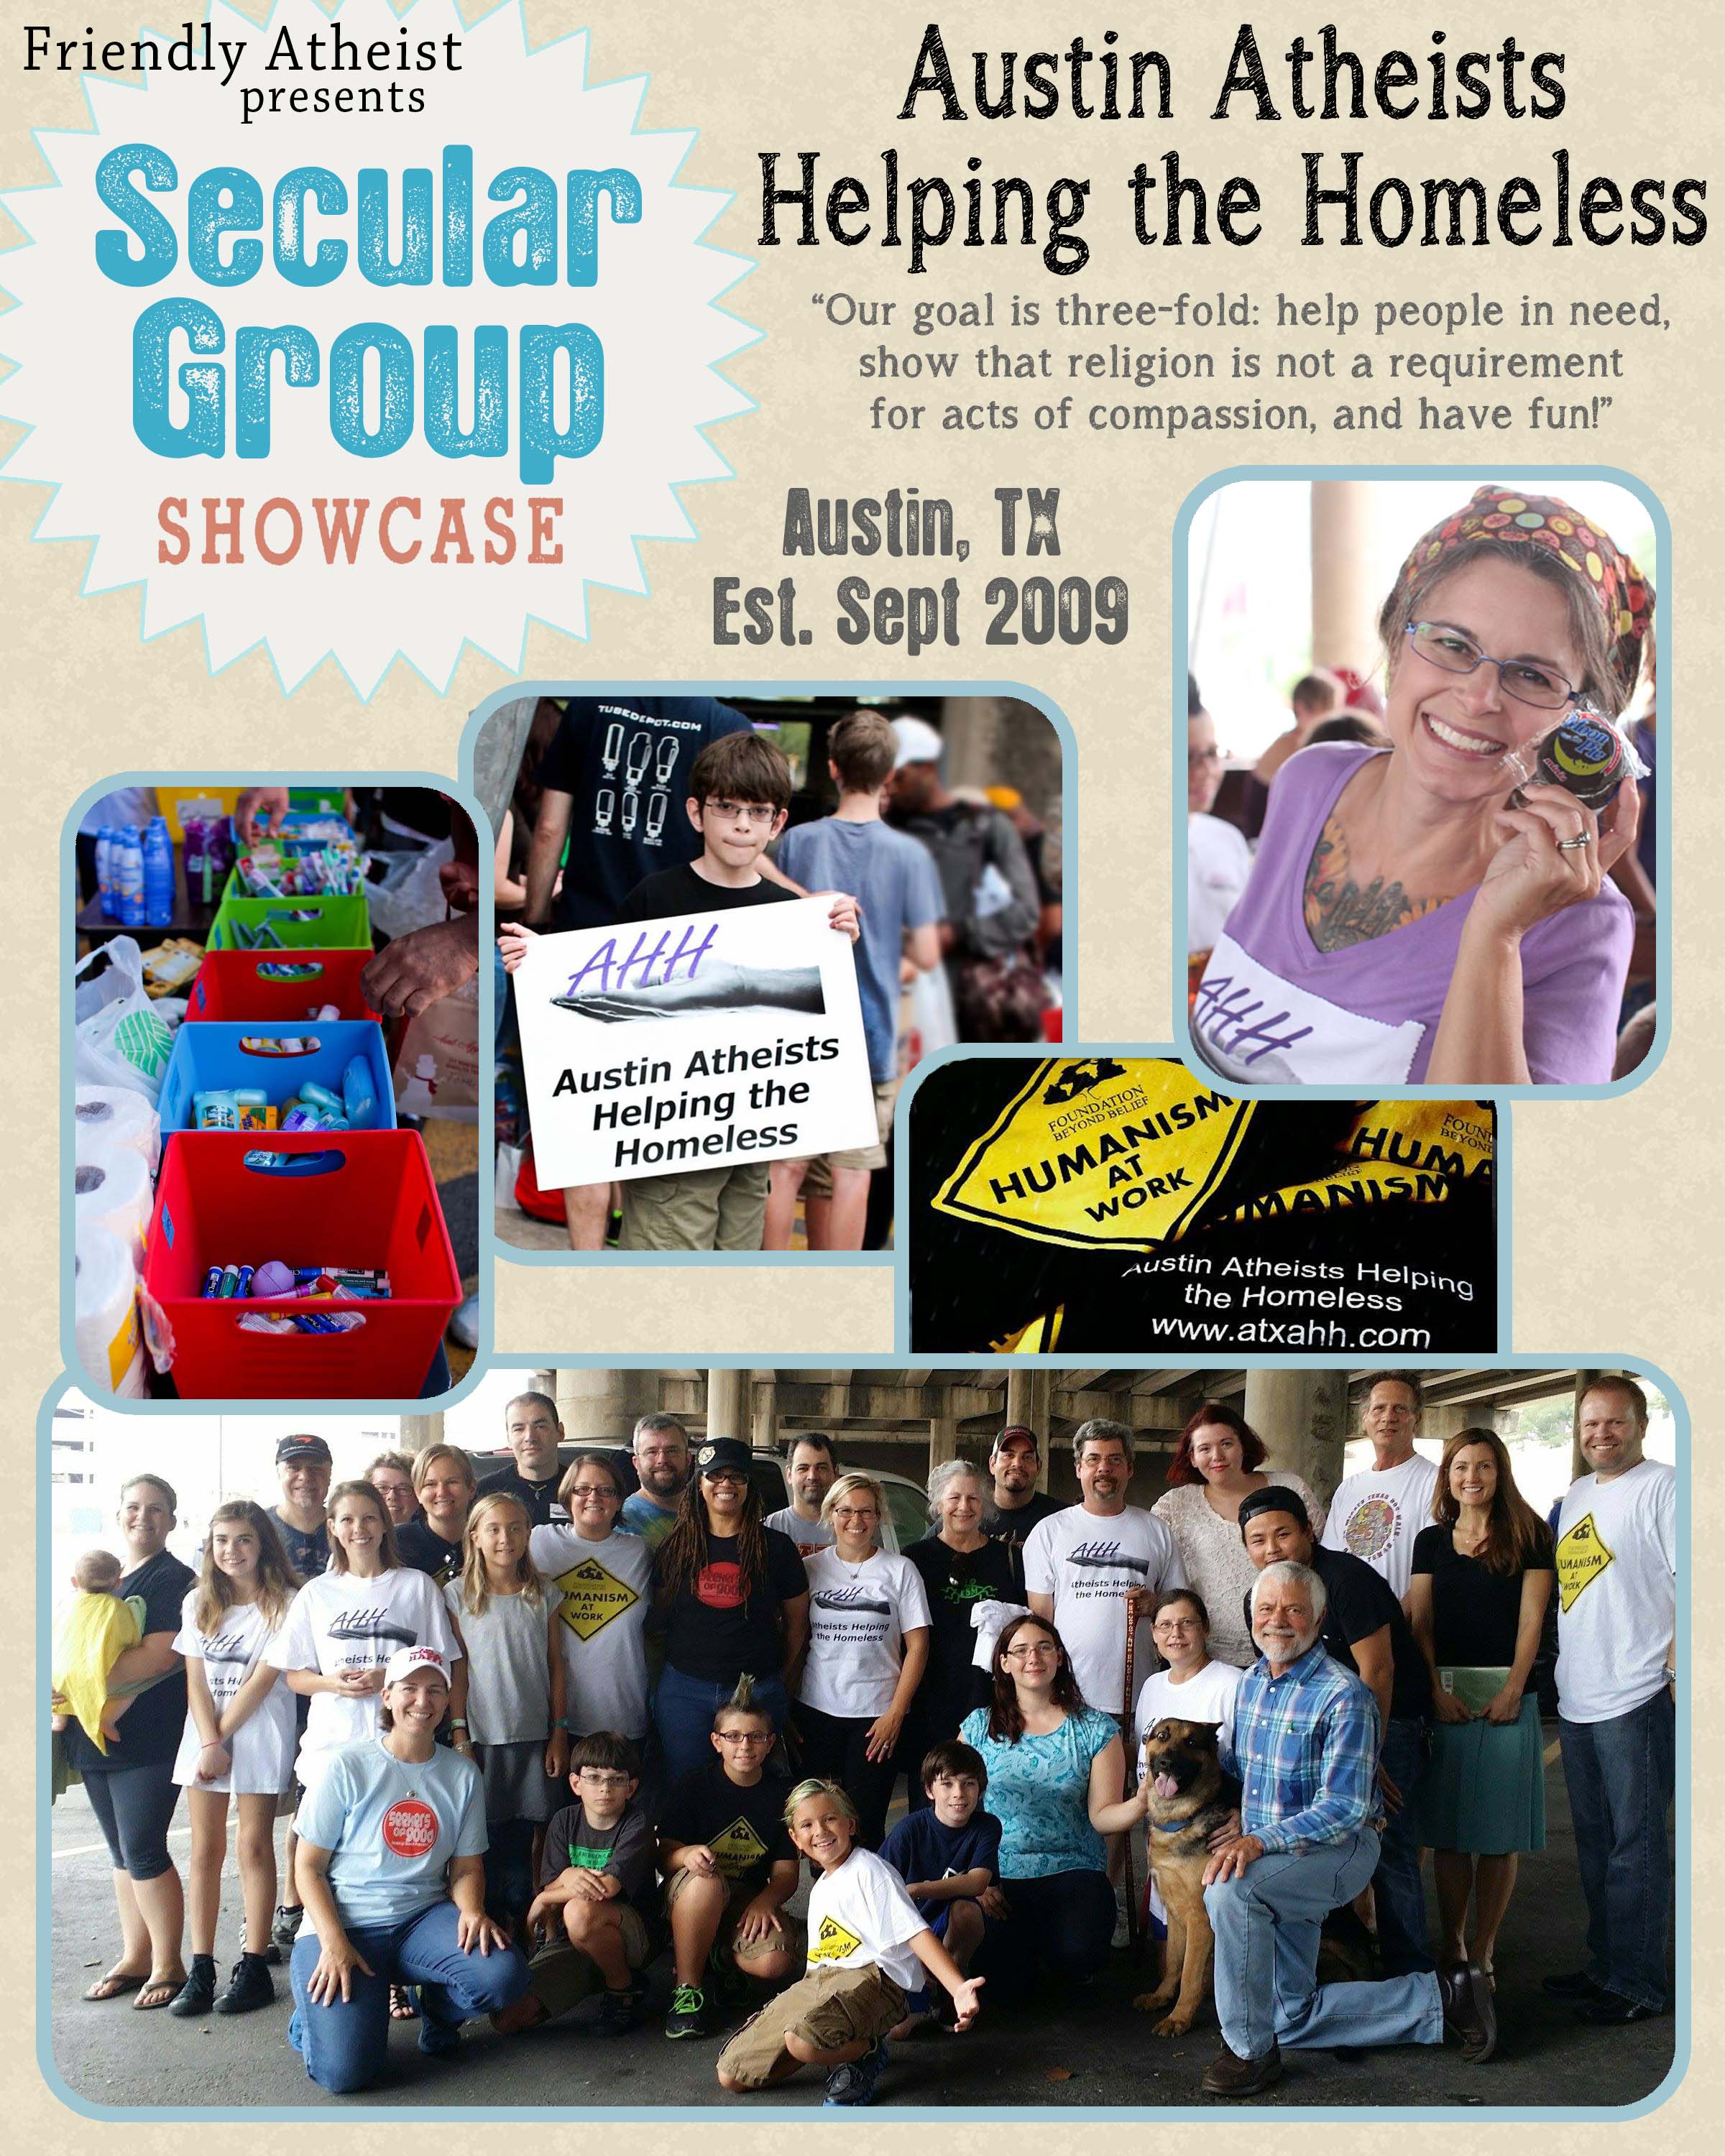 Secular Group Showcase: Austin Atheists Helping the Homeless